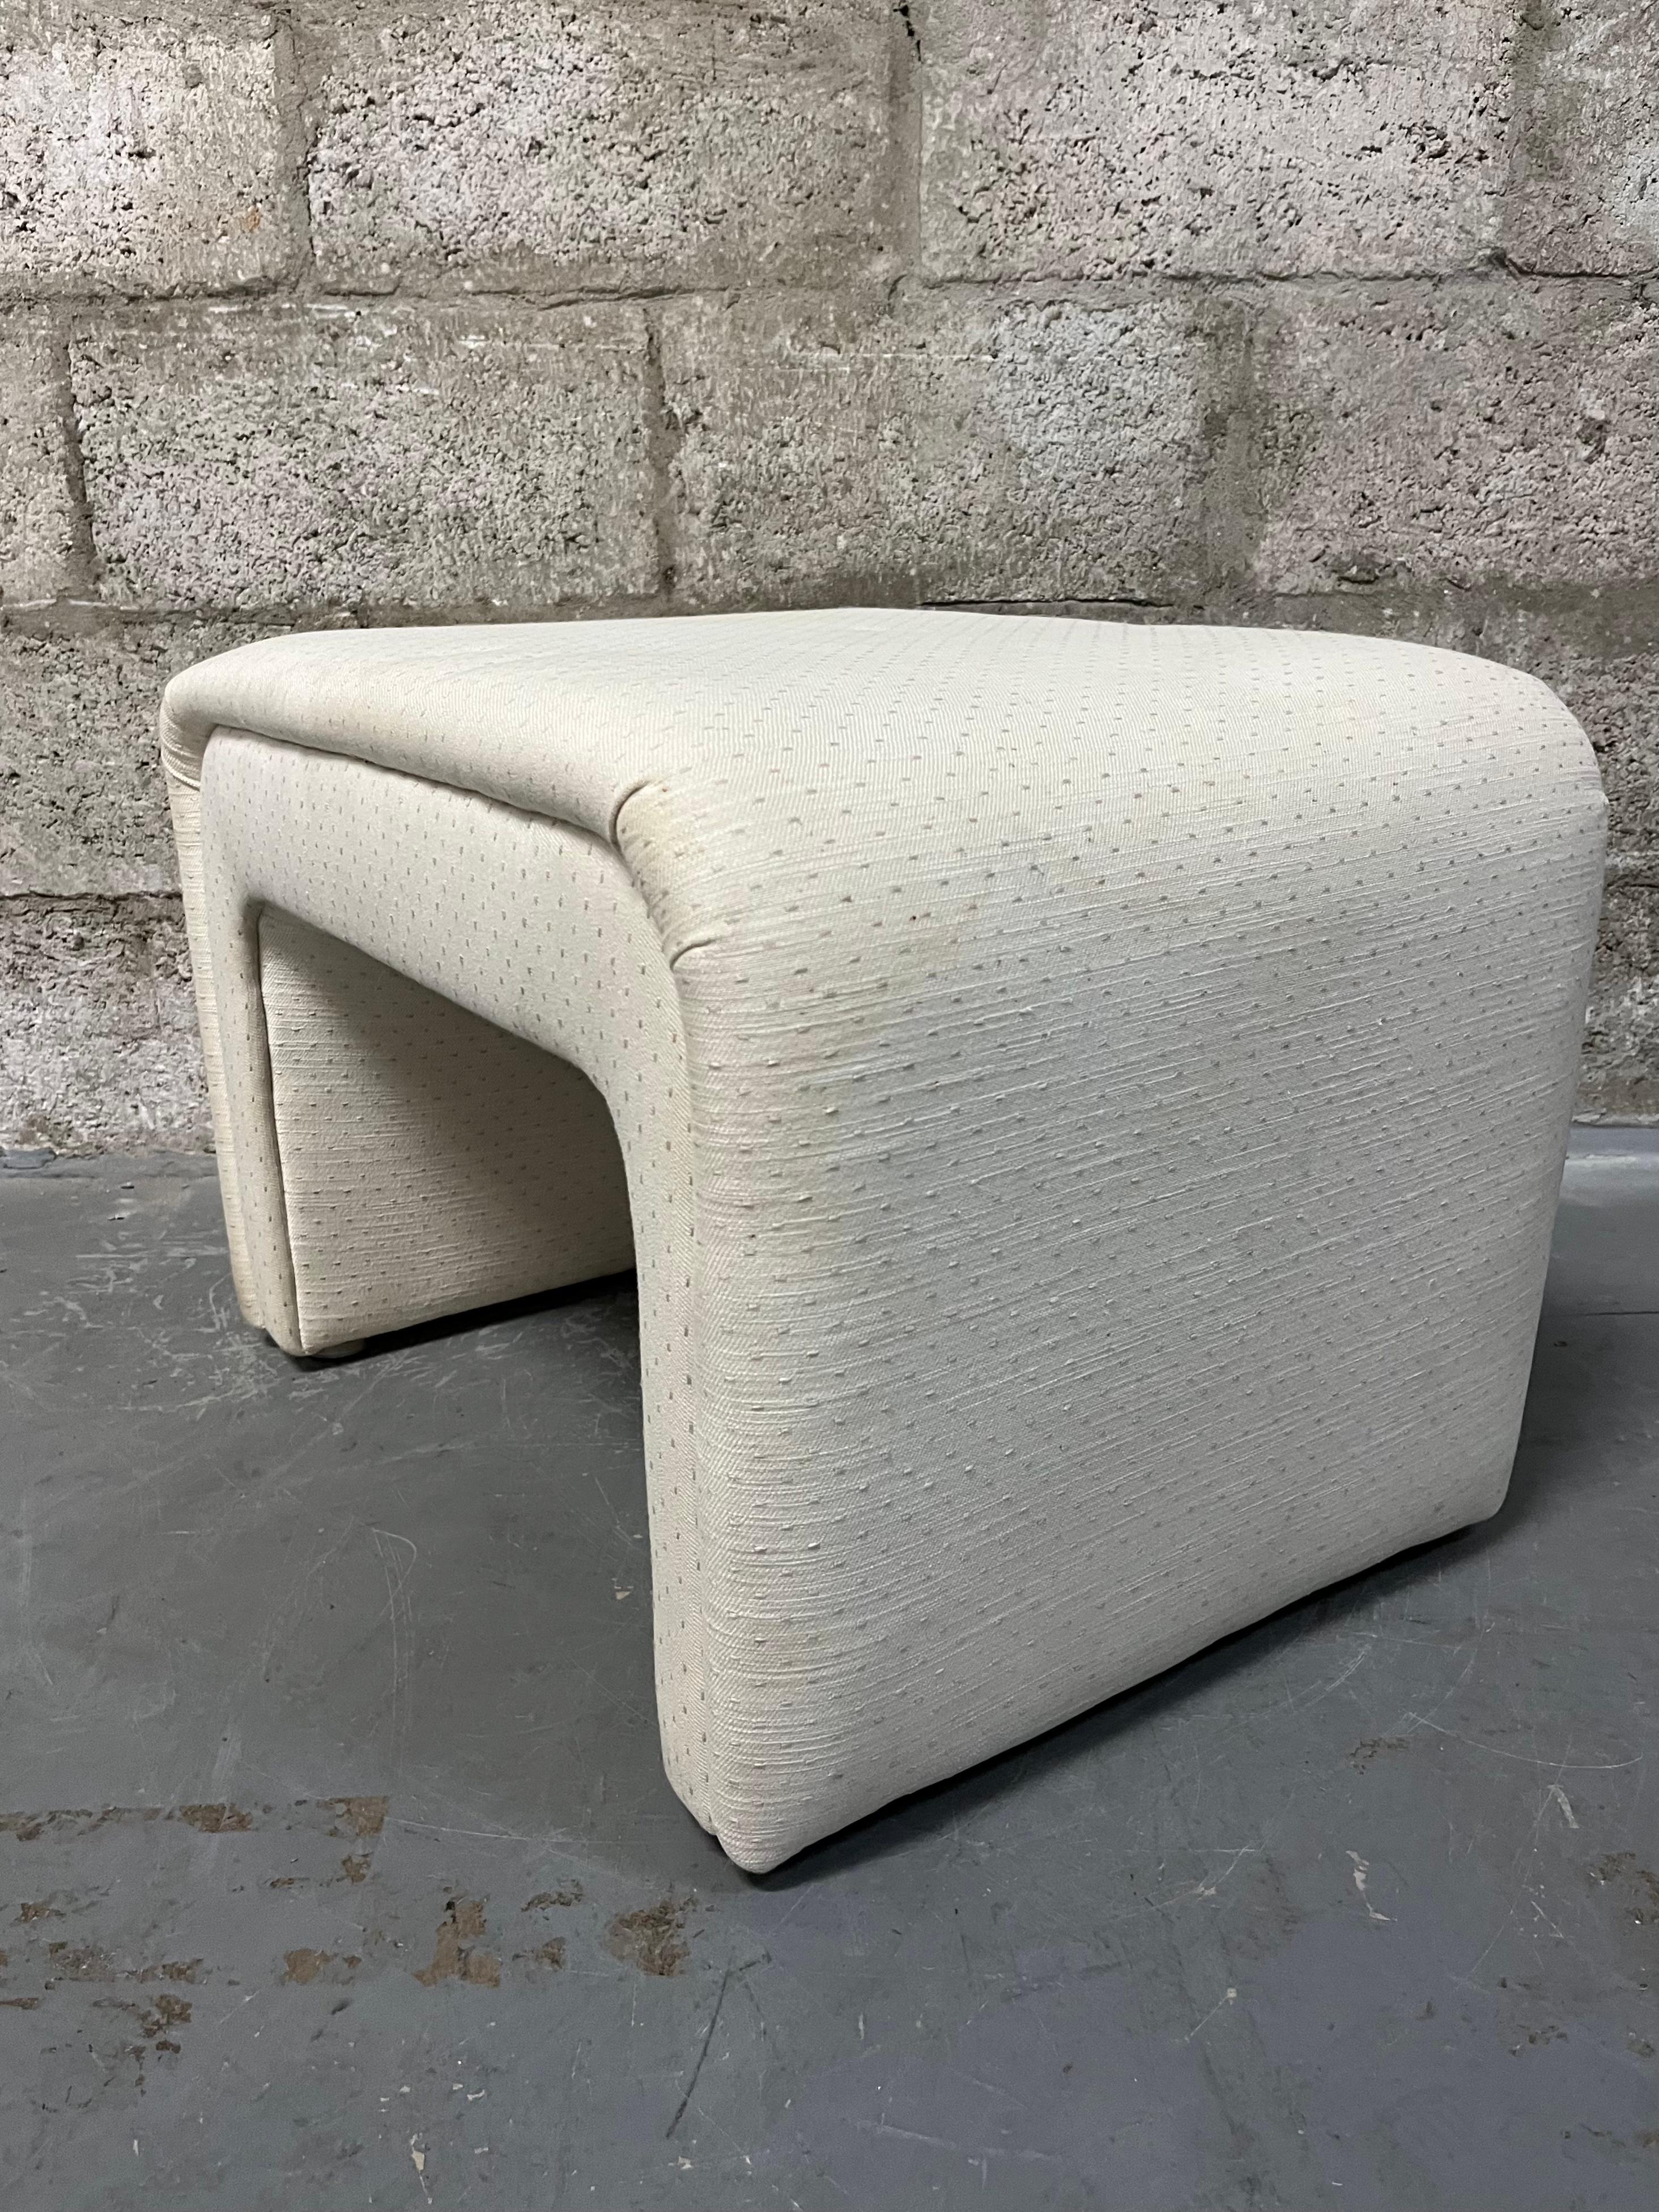 Art Deco Revival Upholstered Waterfall Bench by Thayer Coggin. Circa 1980s  In Good Condition For Sale In Miami, FL